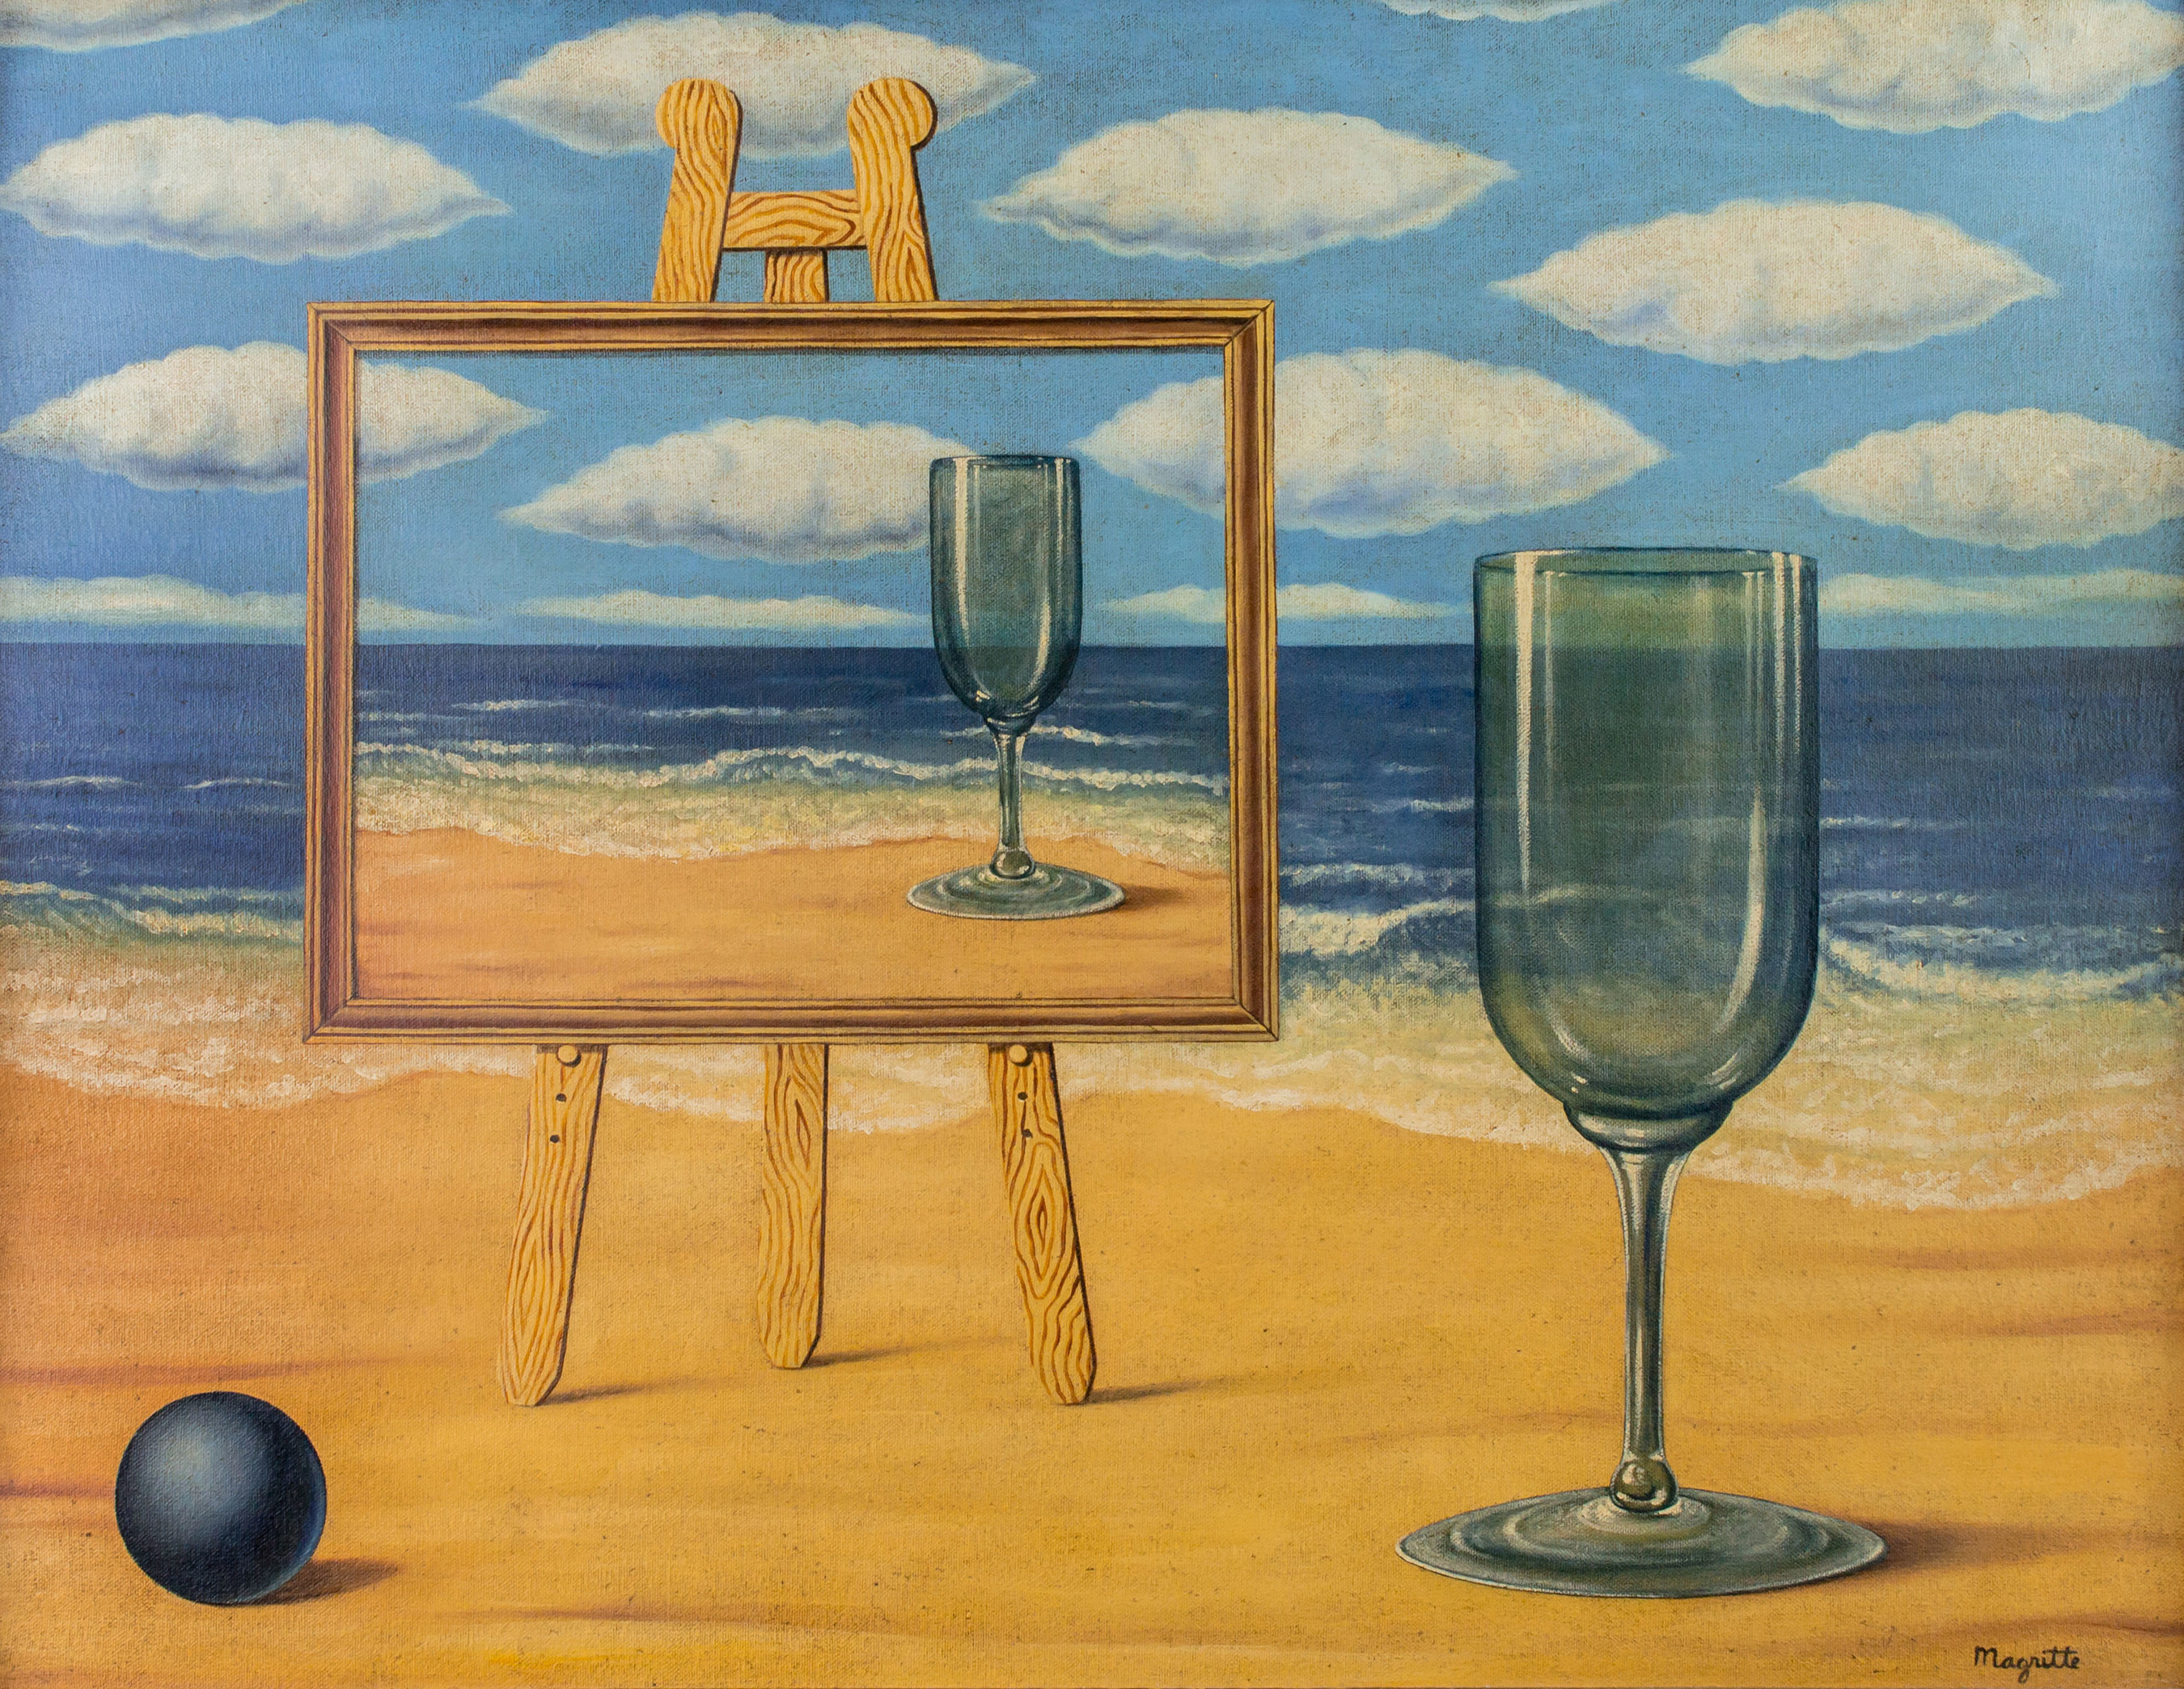 A Rene Magritte oil painting, estimated to be worth $800,000, will be auctioned Thursday, October 29 in J. Levine Auction & Appraisal's Fall Catalog Auction in Scottsdale, Arizona. www.jlevines.com